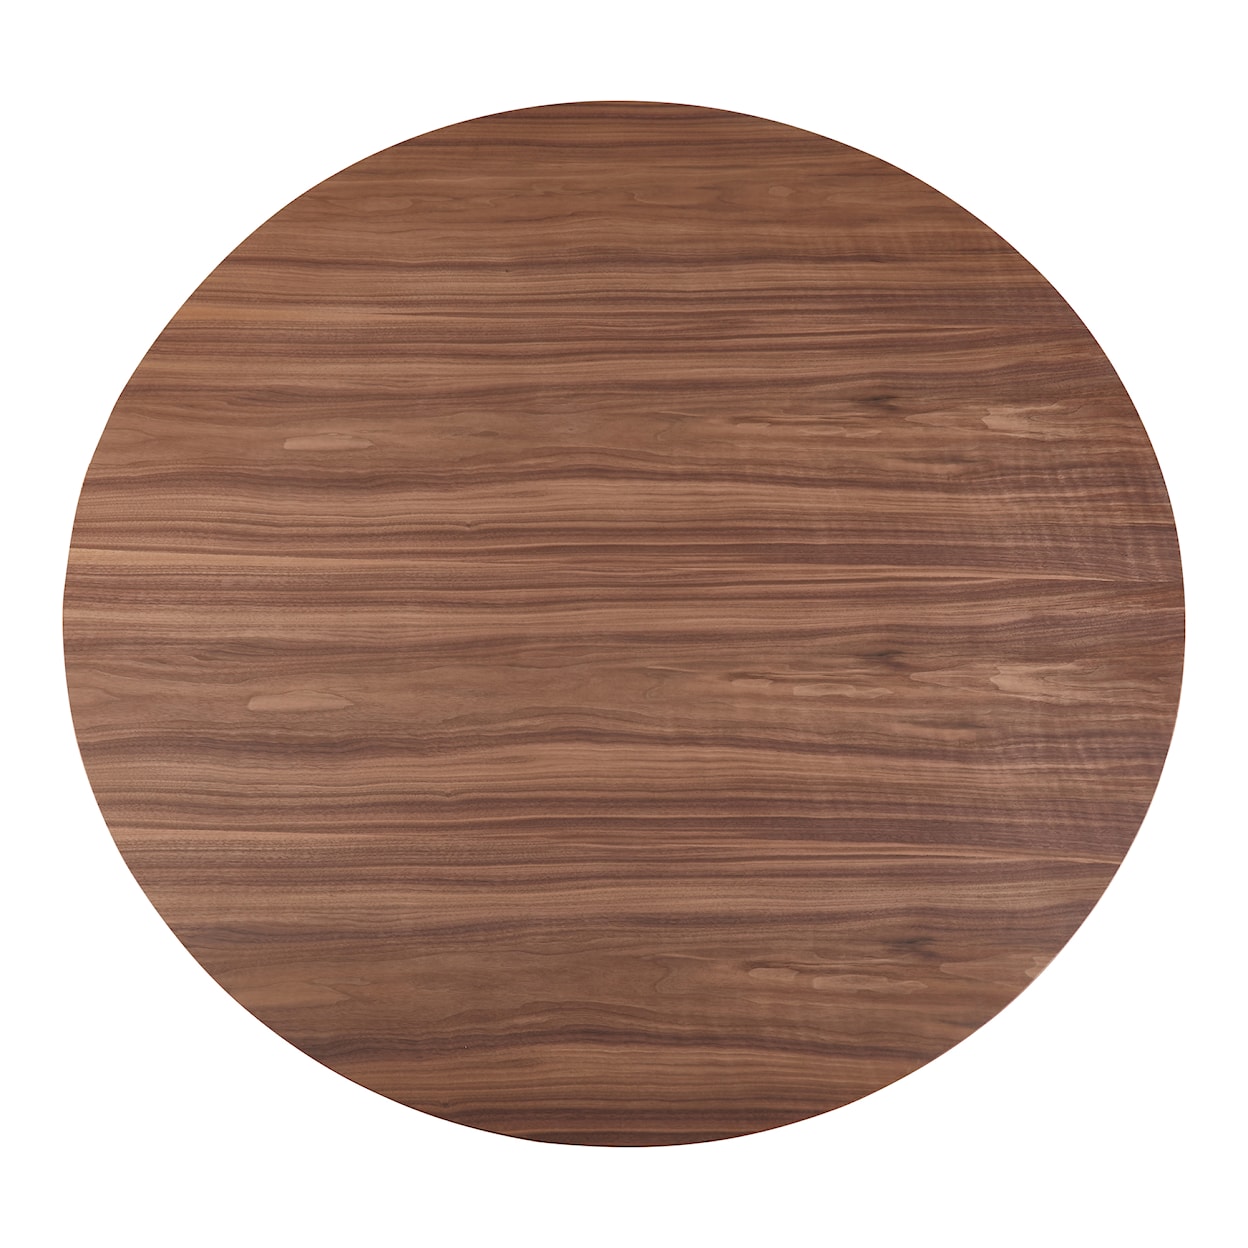 Moe's Home Collection Otago Otago Dining Table 54In Round Walnut